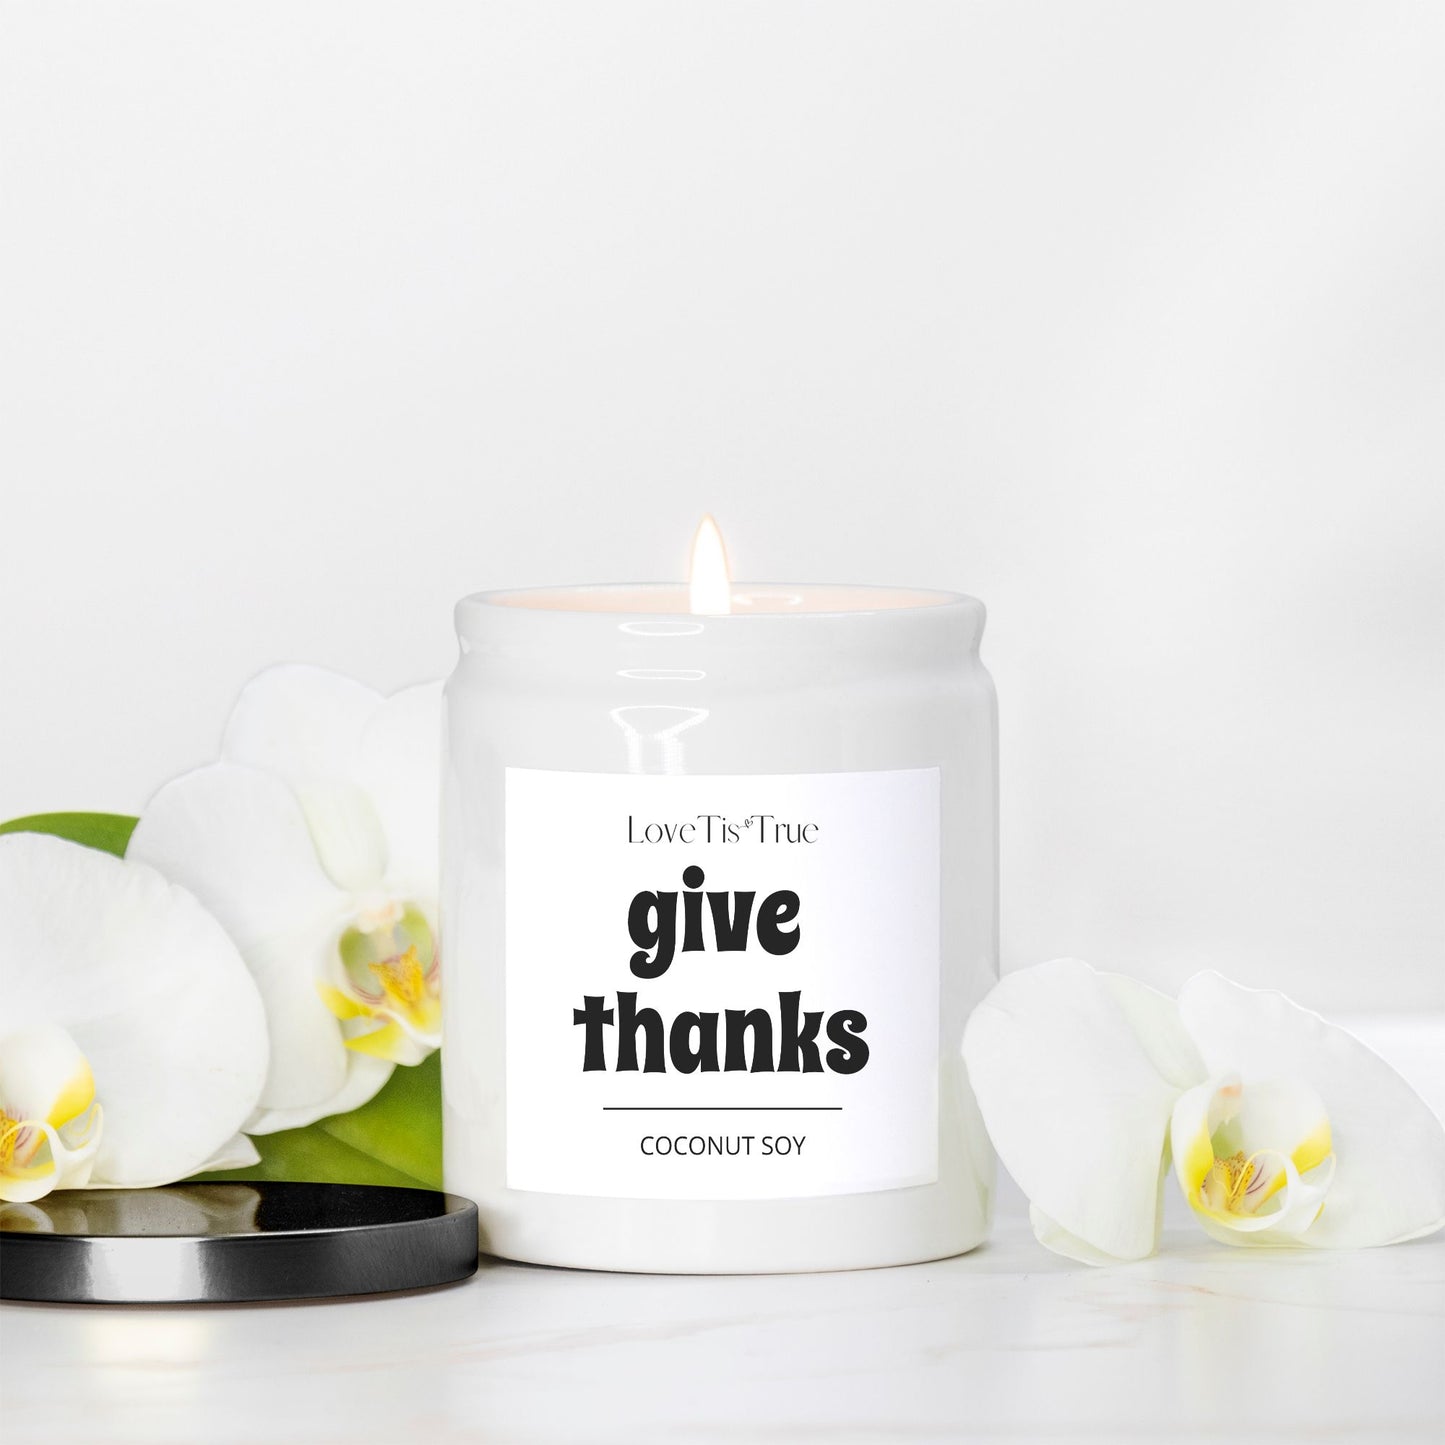 Give Thanks 8oz Ceramic Candle